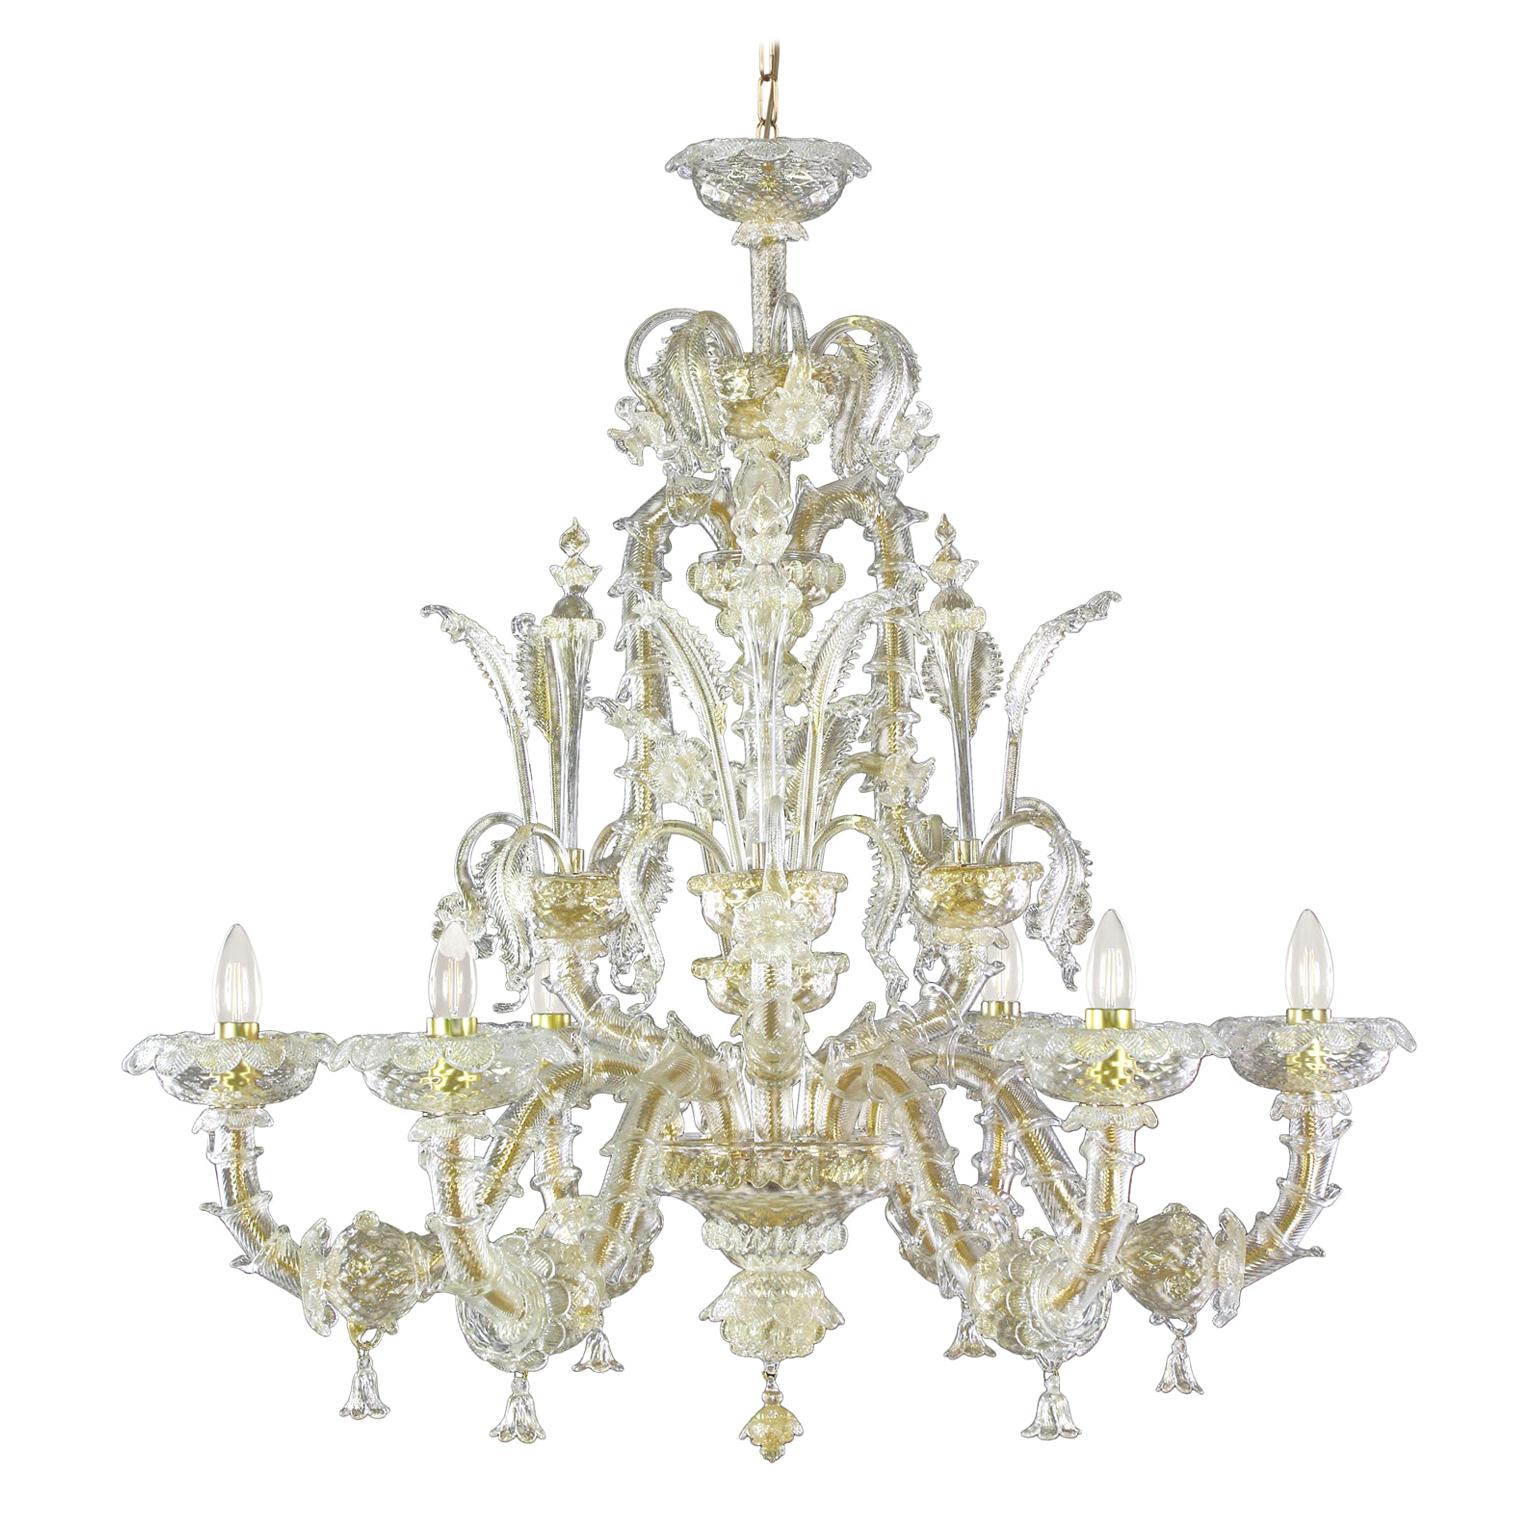 Rezzonico Chandelier 6 arms Crystal and Gold Details Caesar by Multiforme For Sale